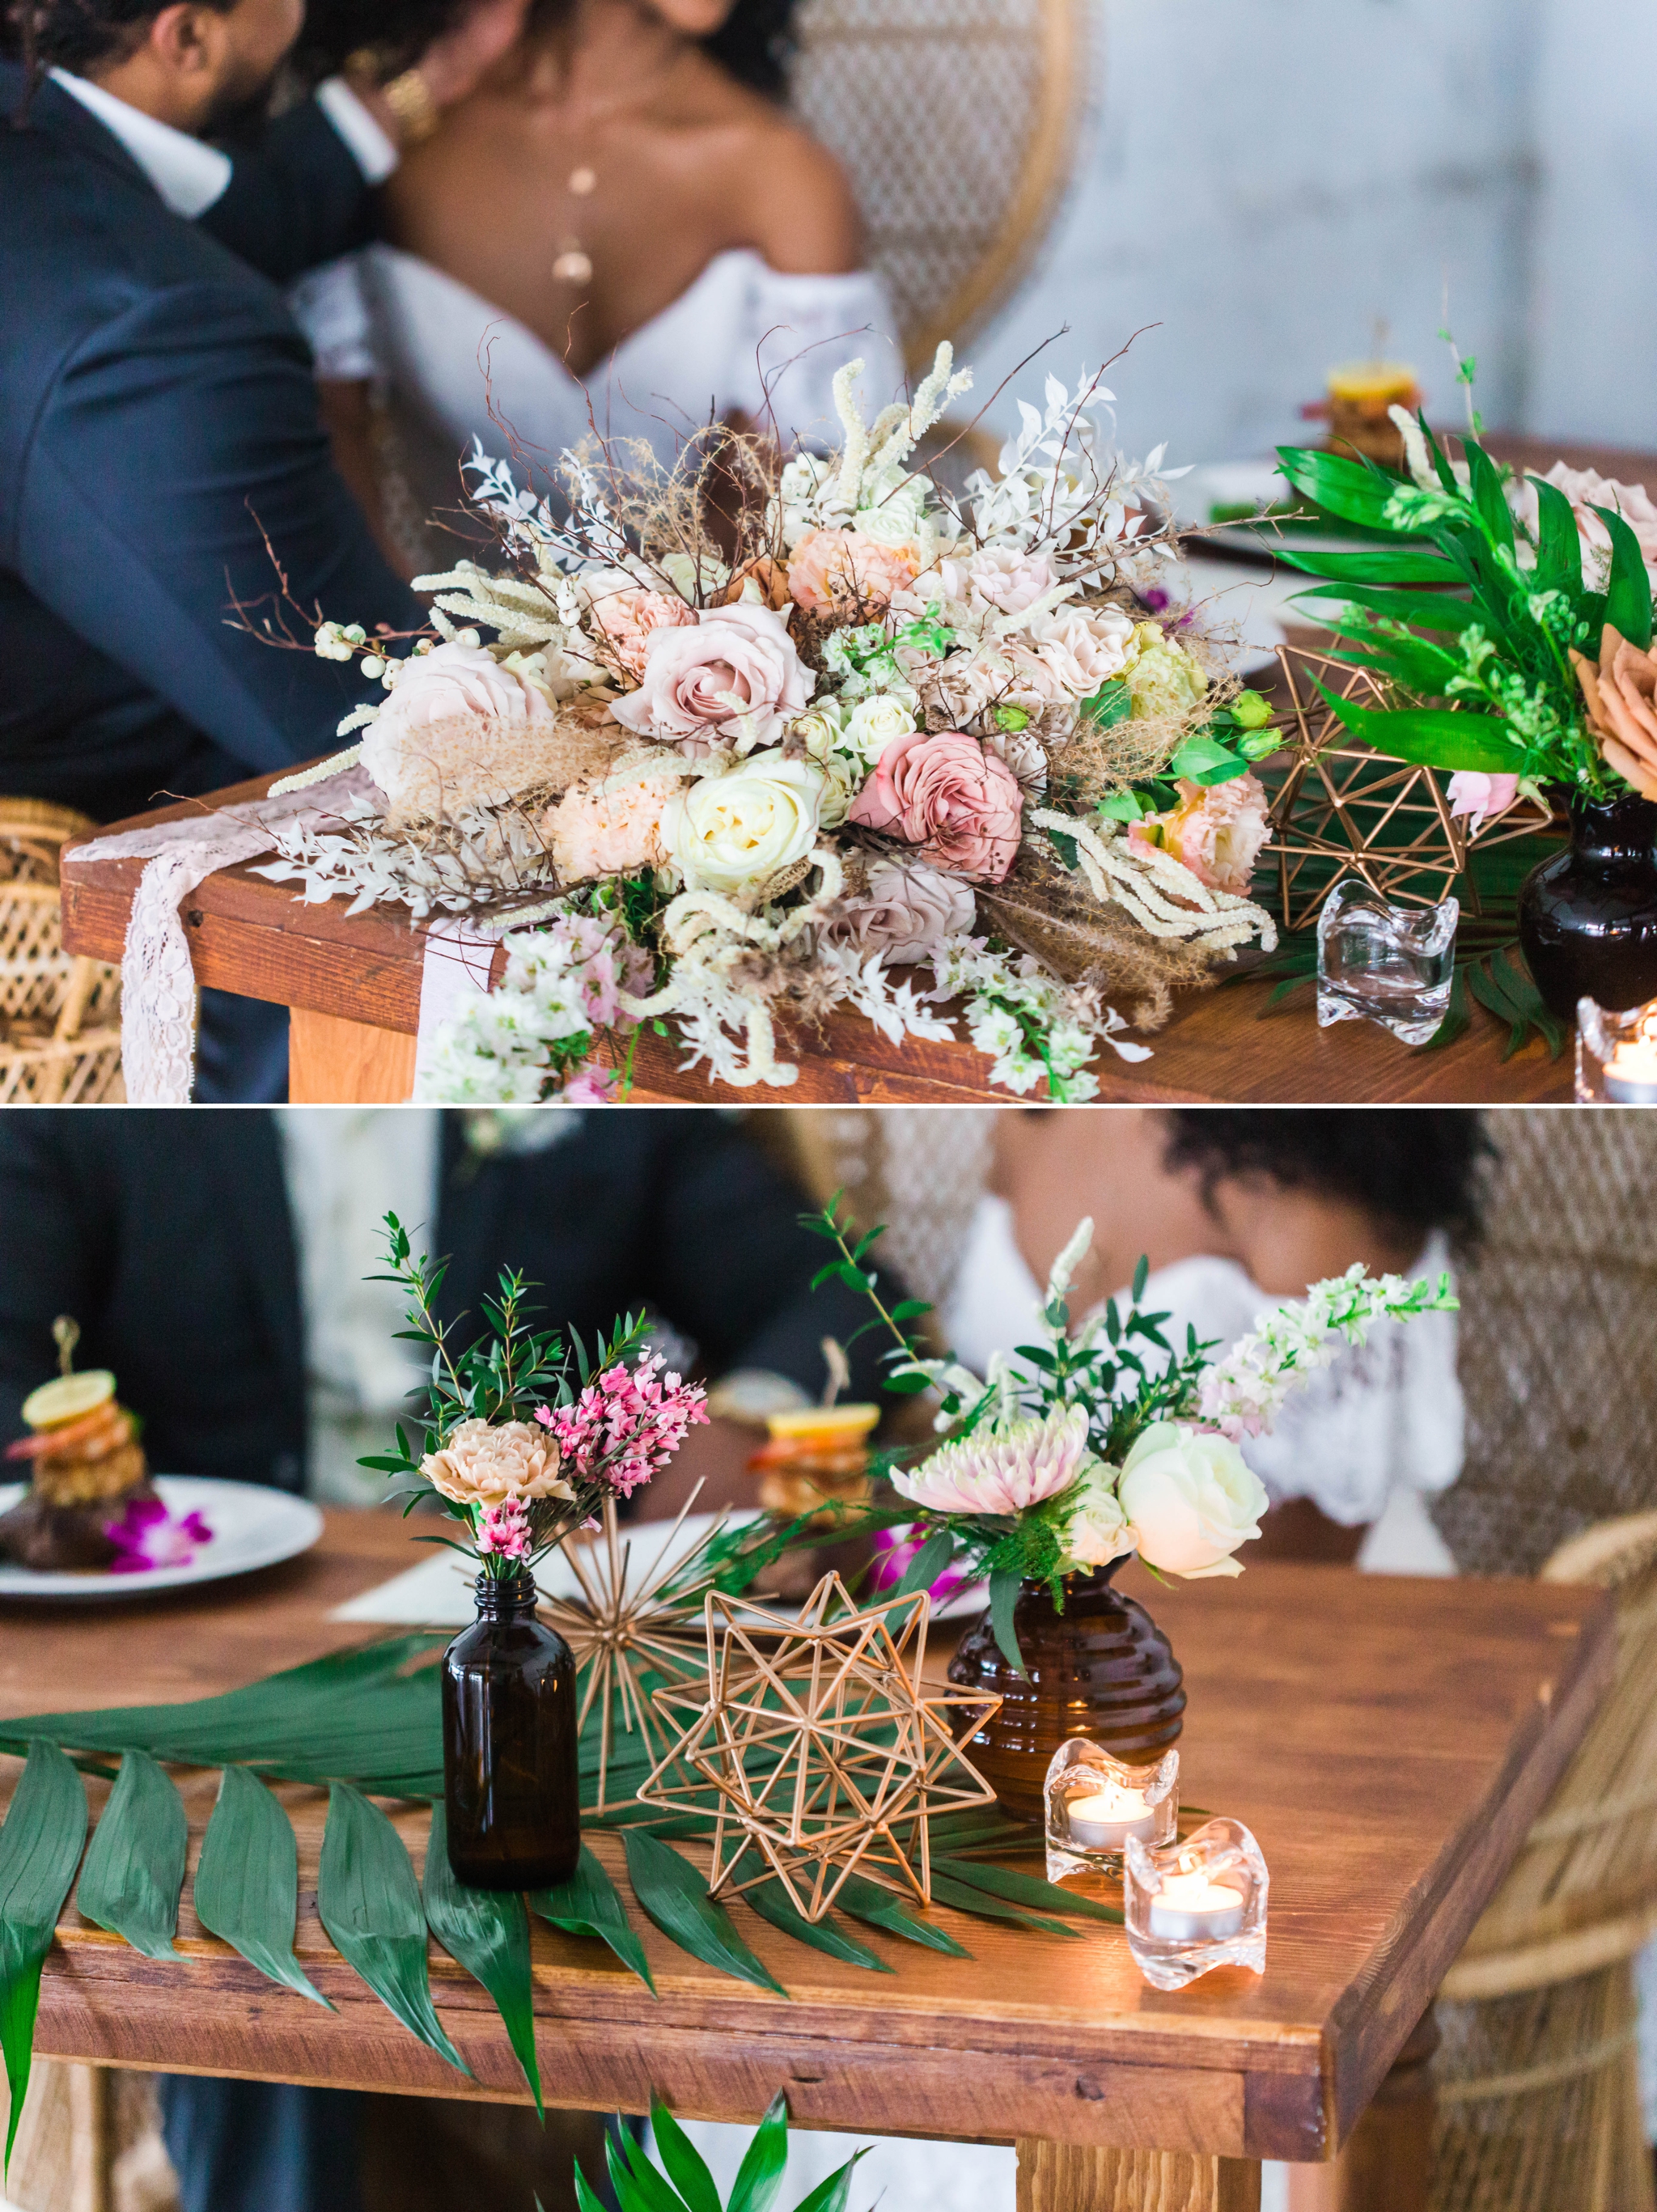  Bride and groom at the sweetheart table at their wedding reception sitting in Midcentury Woven Wicker Peacock Chairs - Black Love - Tropical Destination Wedding Inspiration - Oahu Hawaii Wedding Photography - indoor natural light photographer 